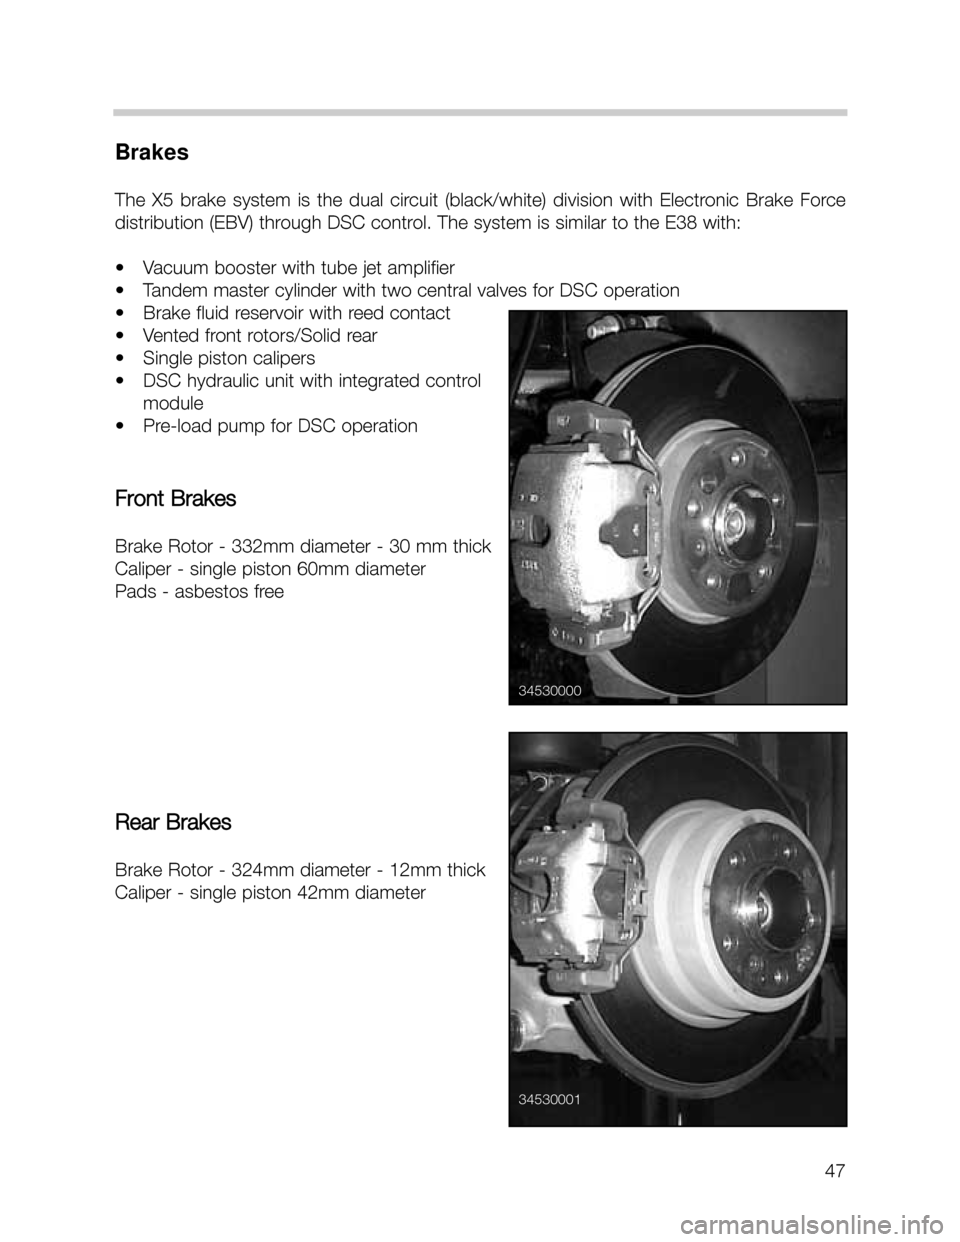 BMW X5 2002 E53 Workshop Manual 47
Brakes
The  X5  brake  system  is  the  dual  circuit  (black/white)  division  with  Electronic  Brake  Force
distribution (EBV) through DSC control. The system is similar to the E38 with:
• Vac